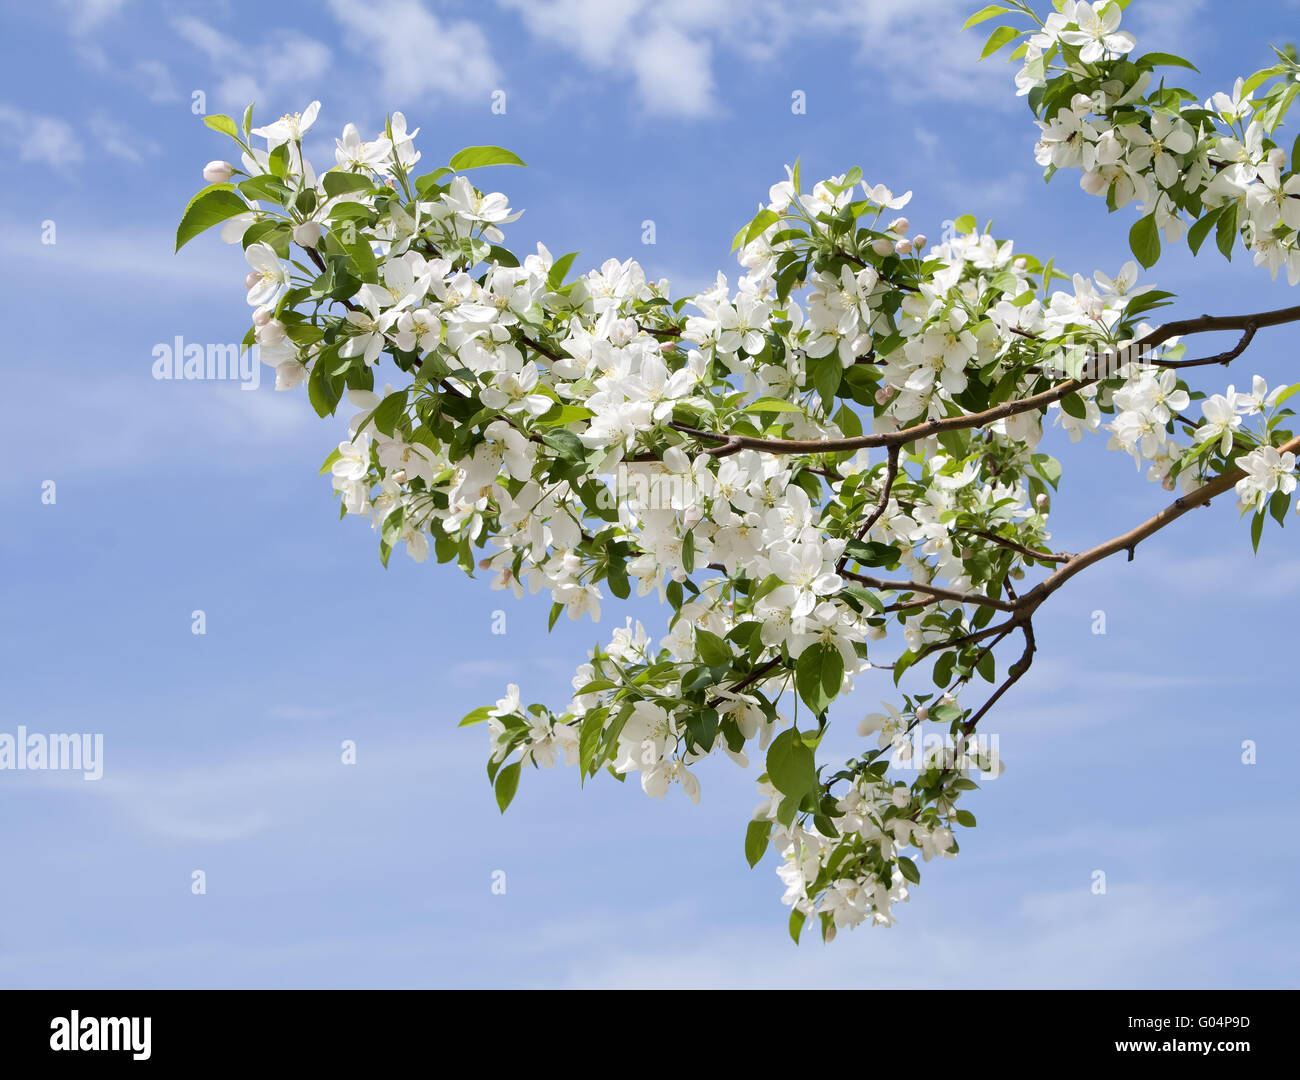 branch of apple tree with many flowers over blue sky Stock Photo